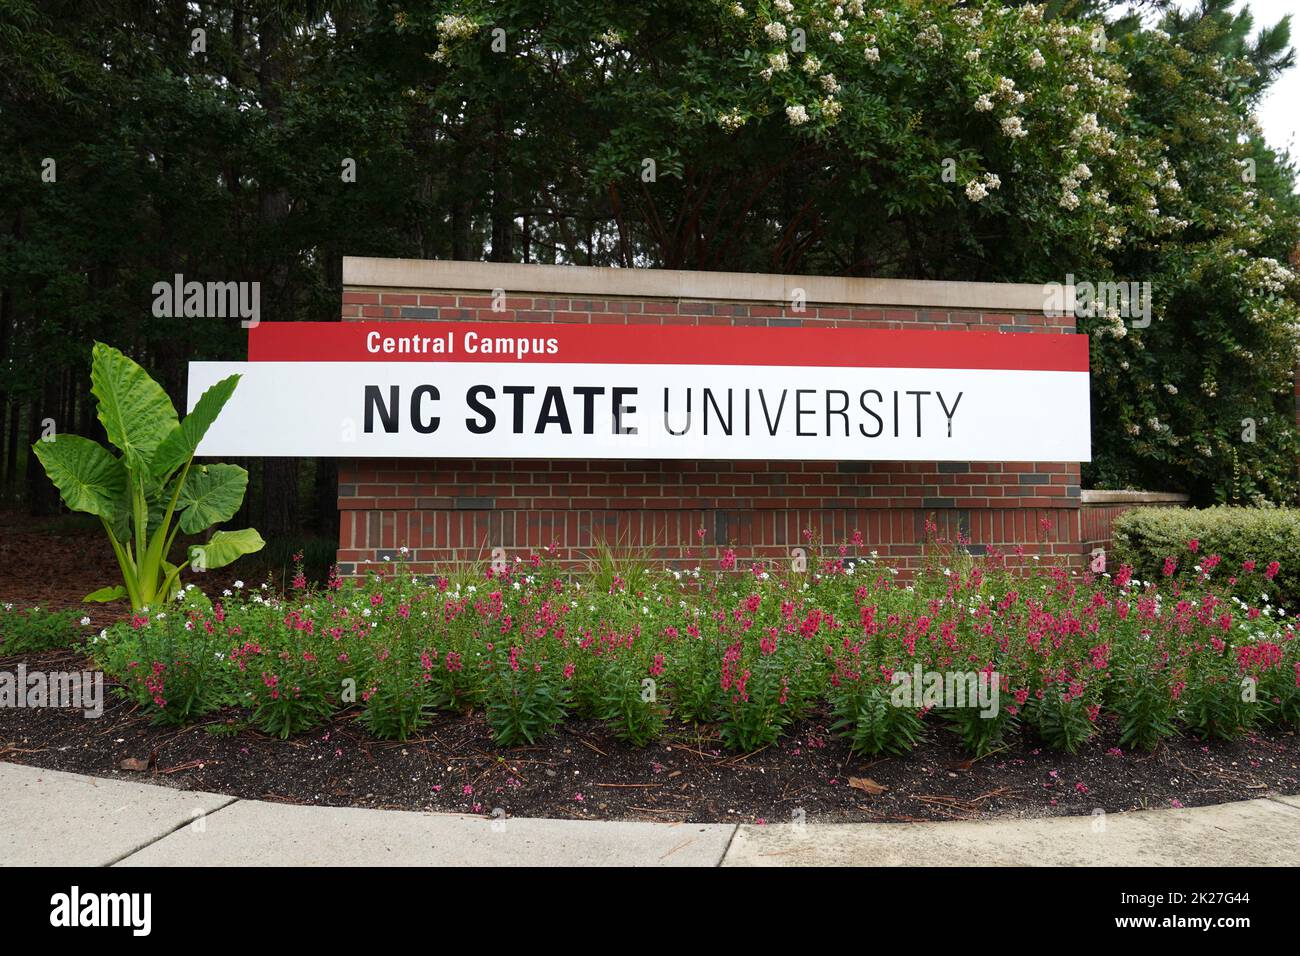 North Carolina State University sign surrounded by a flowerbed Stock Photo